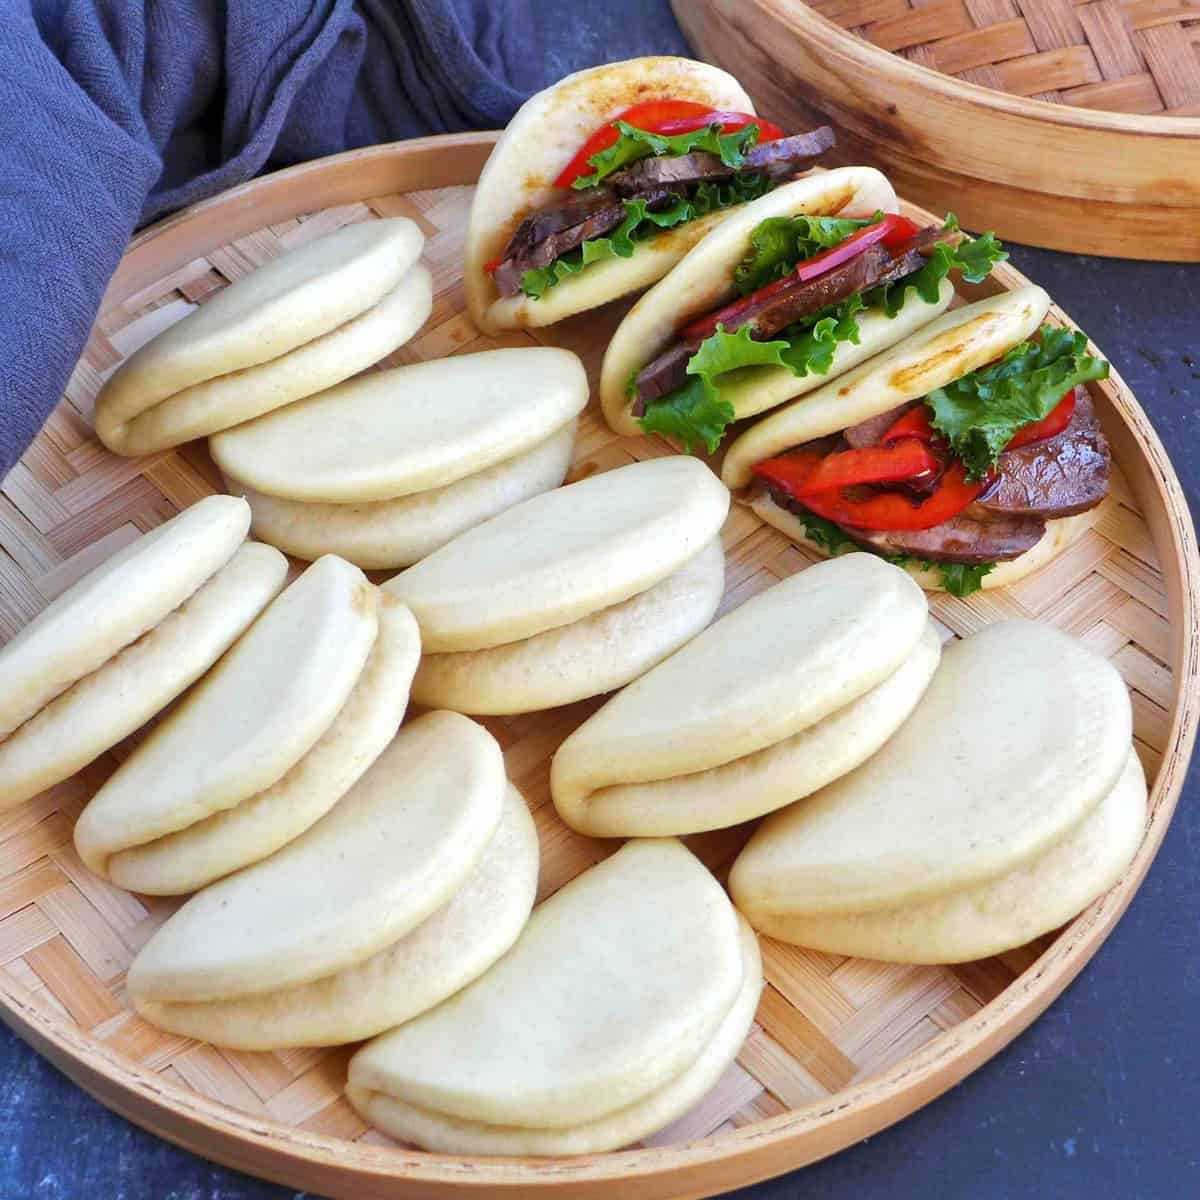 https://redhousespice.com/wp-content/uploads/2022/12/plain-and-filled-bao-buns-2-scaled.jpg